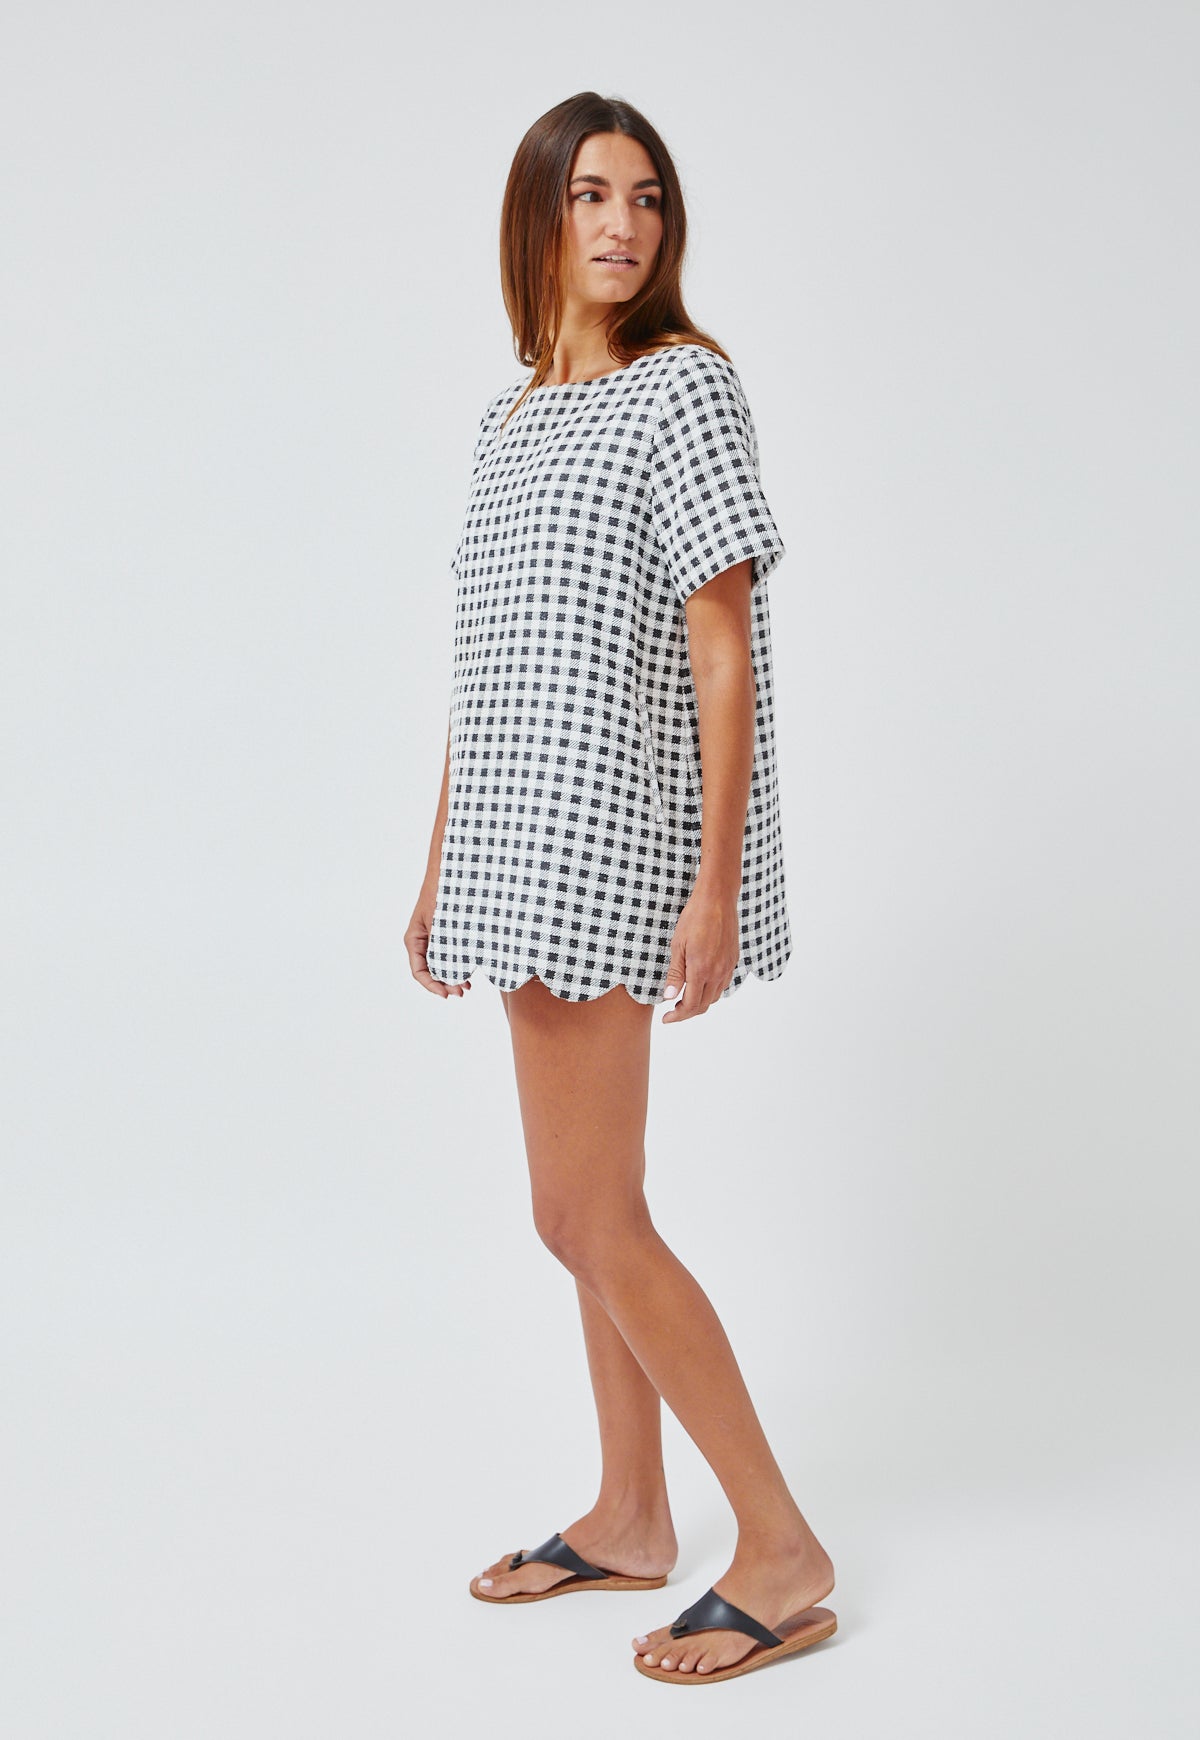 THE SCALLOP A-LINE MINI DRESS in GINGHAM BOUCLE COTTON